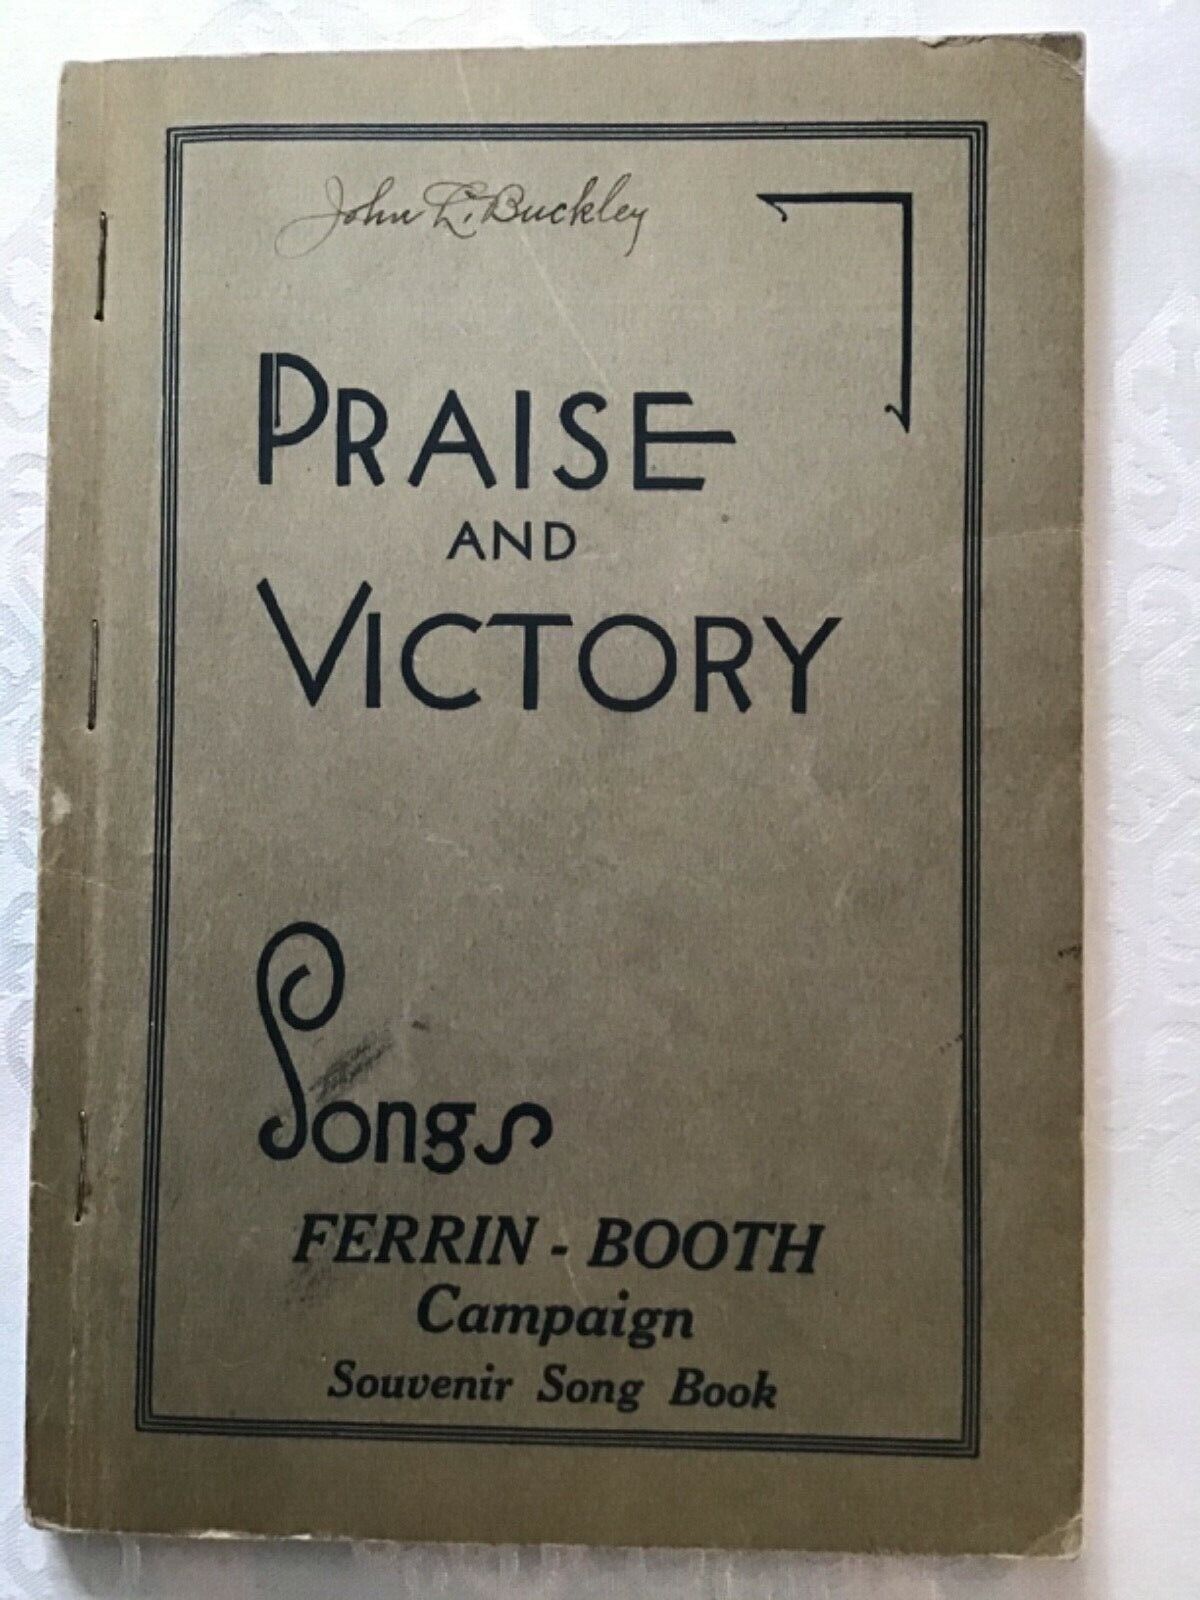 Praise and Victory Songs, Ferrin-Booth Campaign Souvenir Book 1932